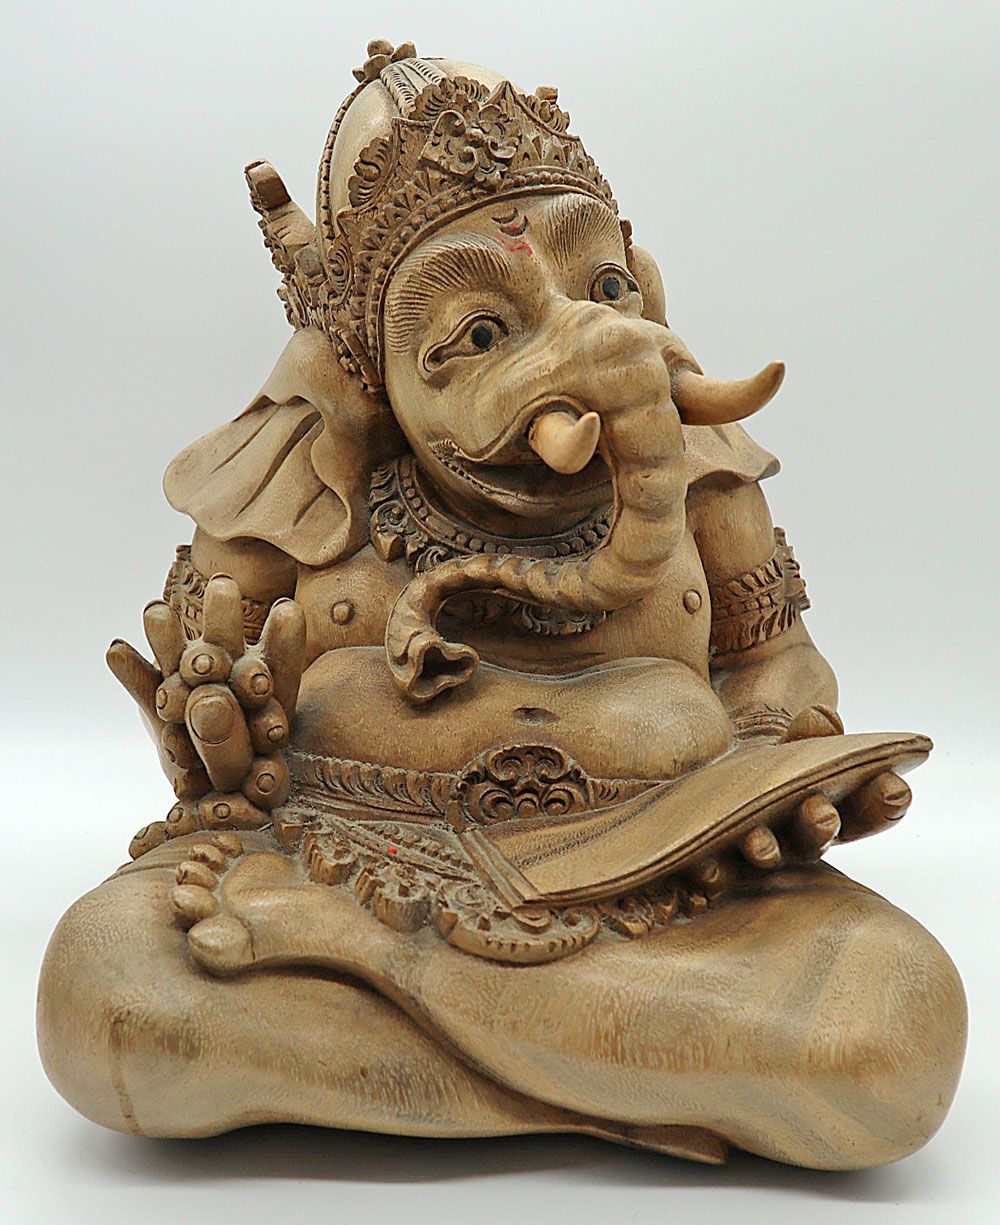 A Wonderful Balinese Carving of a Seated Ganesh(a) holding a Lontar Book and Mala